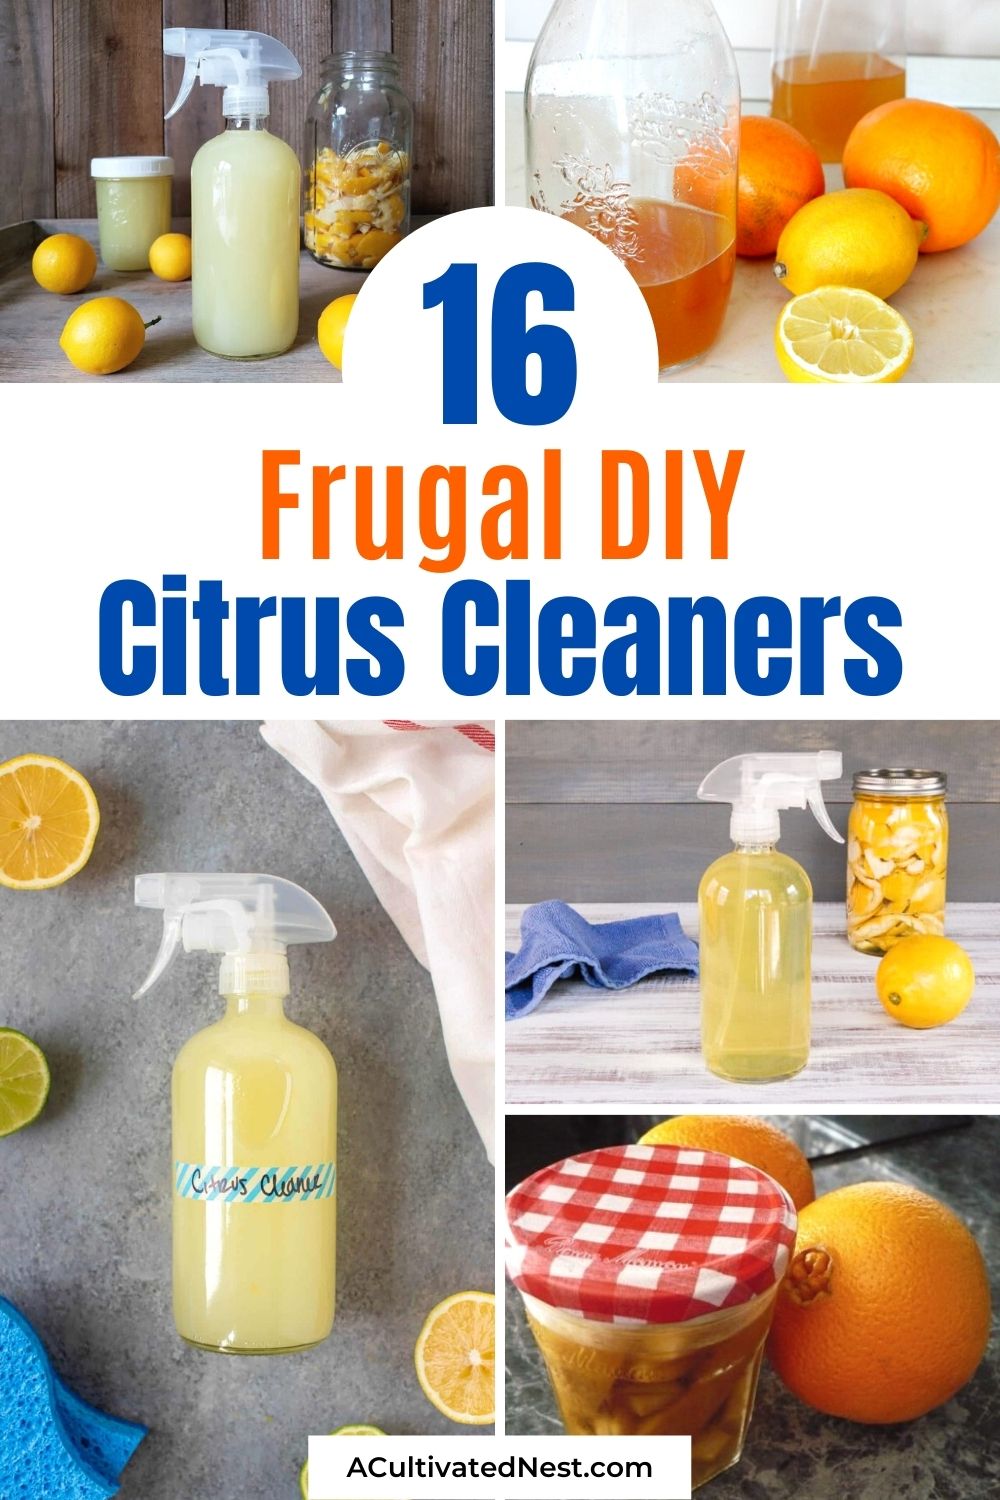 16 Frugal DIY Citrus Cleaners- You can clean your home naturally and make it smell refreshingly bright at the same time with these frugal DIY citrus cleaners! | #allNaturalCleaner #homemadeCleaners #diyCleaners #naturalCleaning #ACultivatedNest